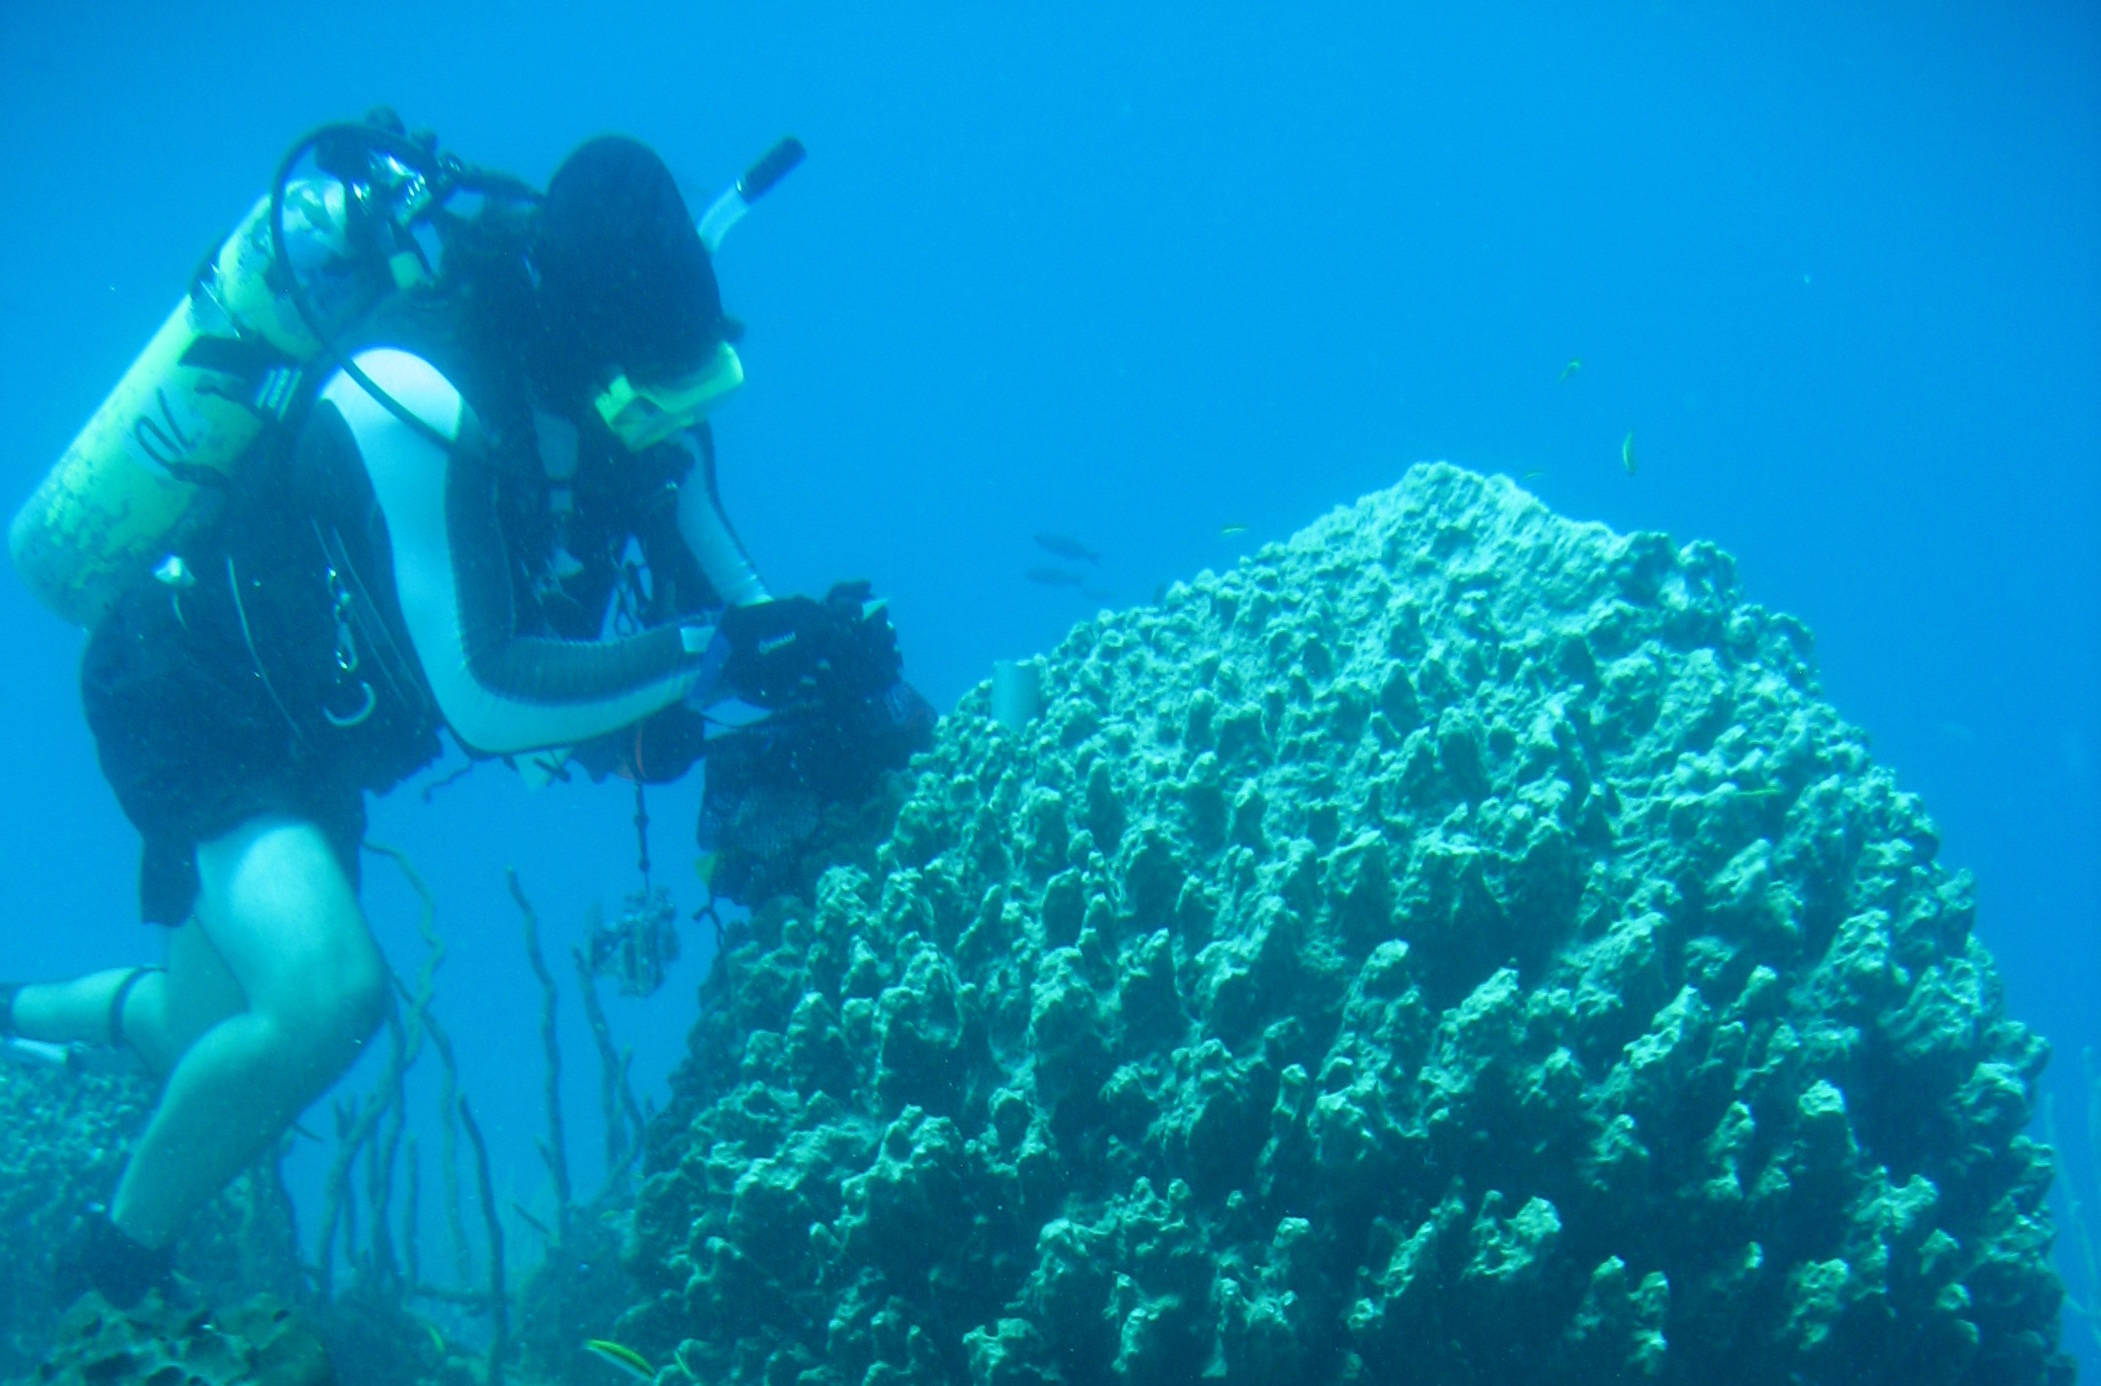 Jan dives on reef with sponges